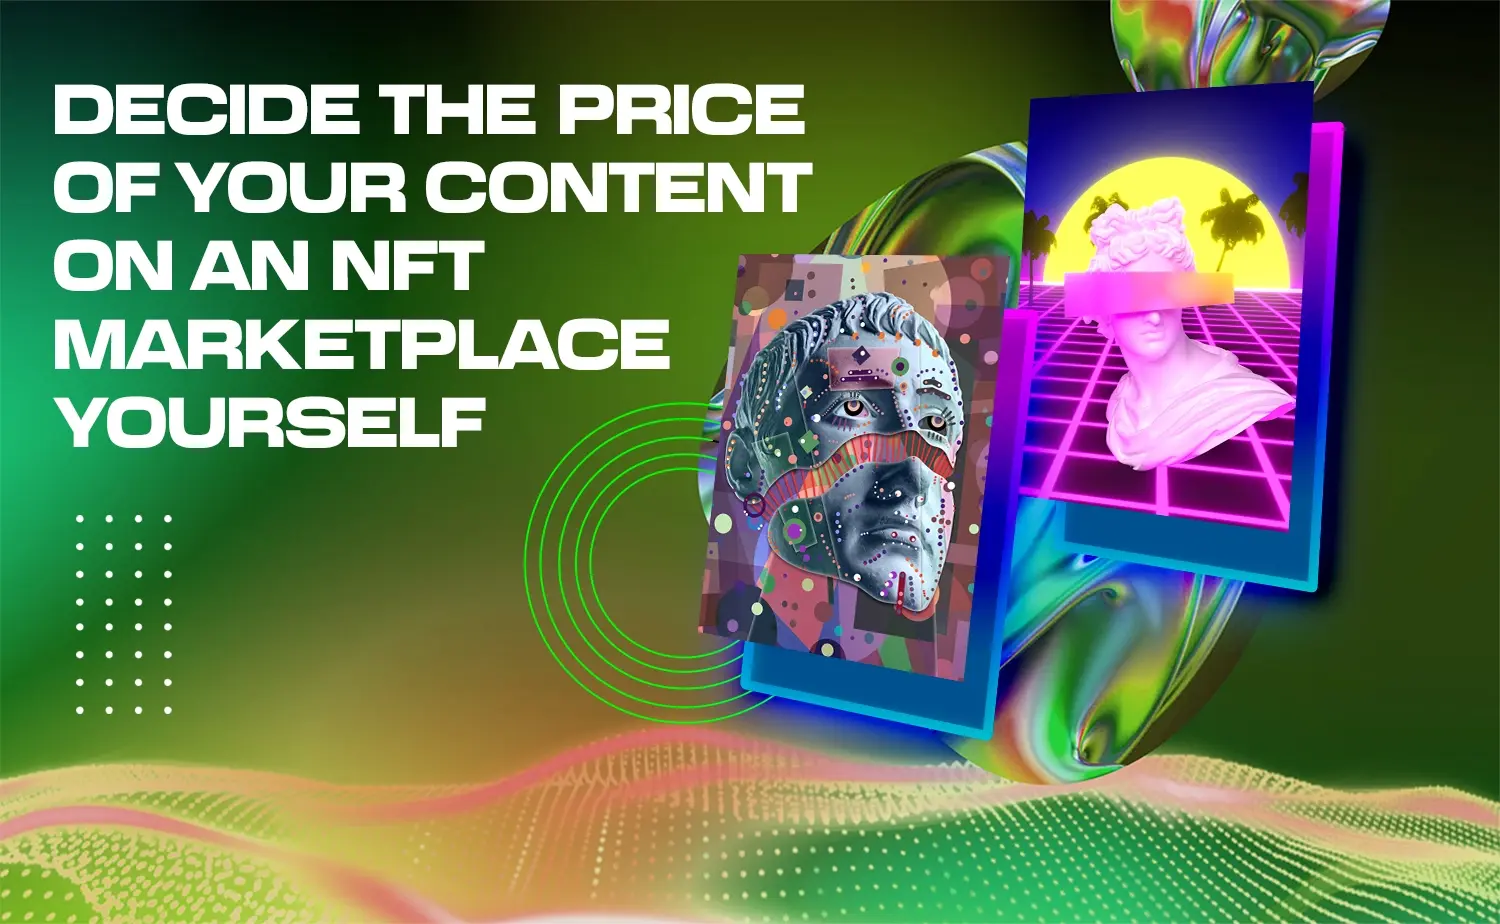 Decide the price of your content on an NFT marketplace